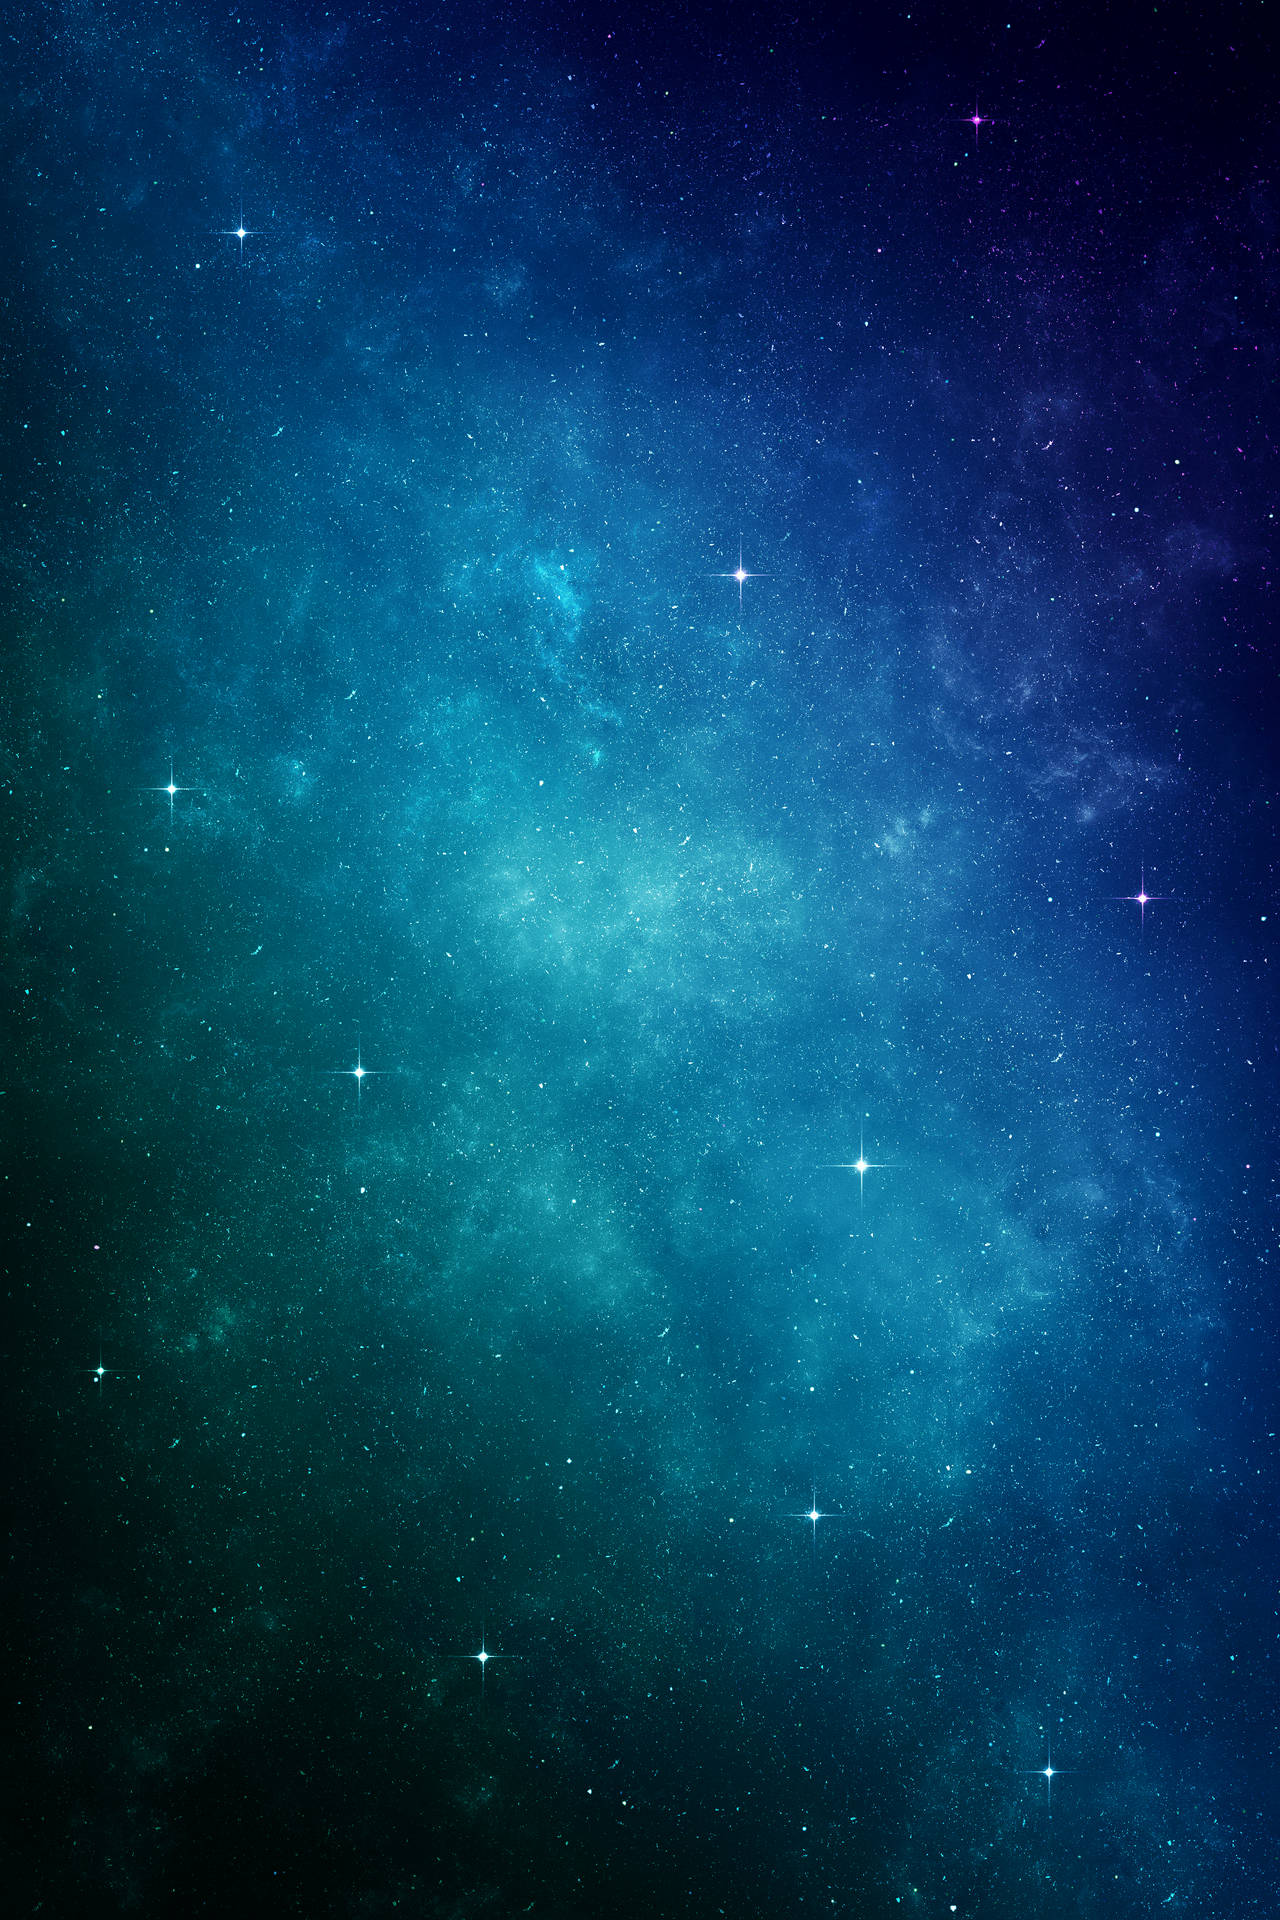 iPhone Wallpaper: Abstract Starry Night Sky Wallpaper